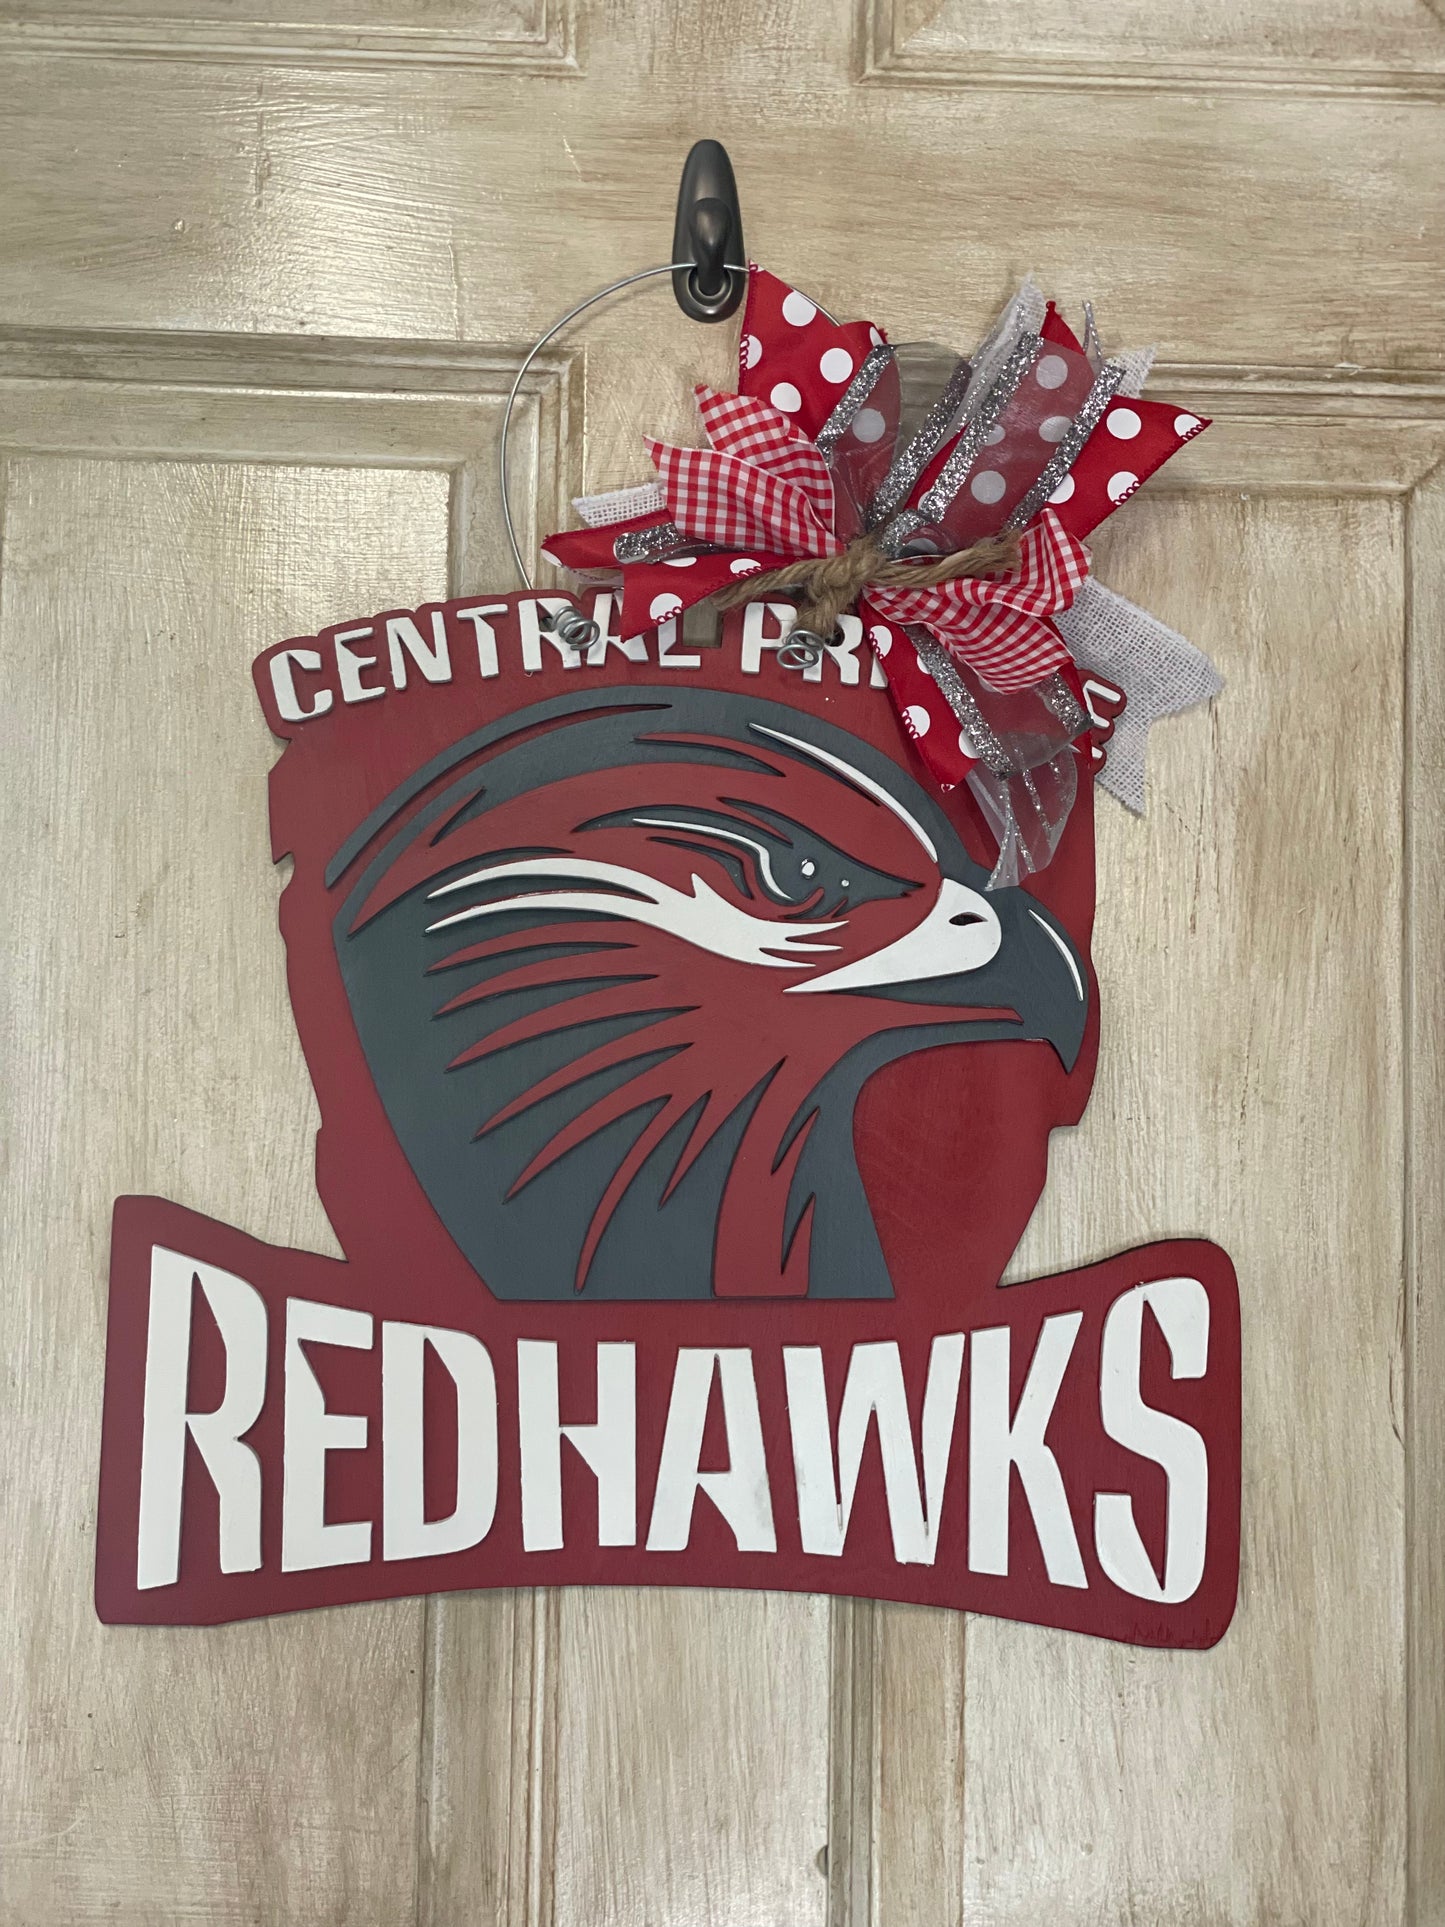 3D Central Private RedHawks door sign